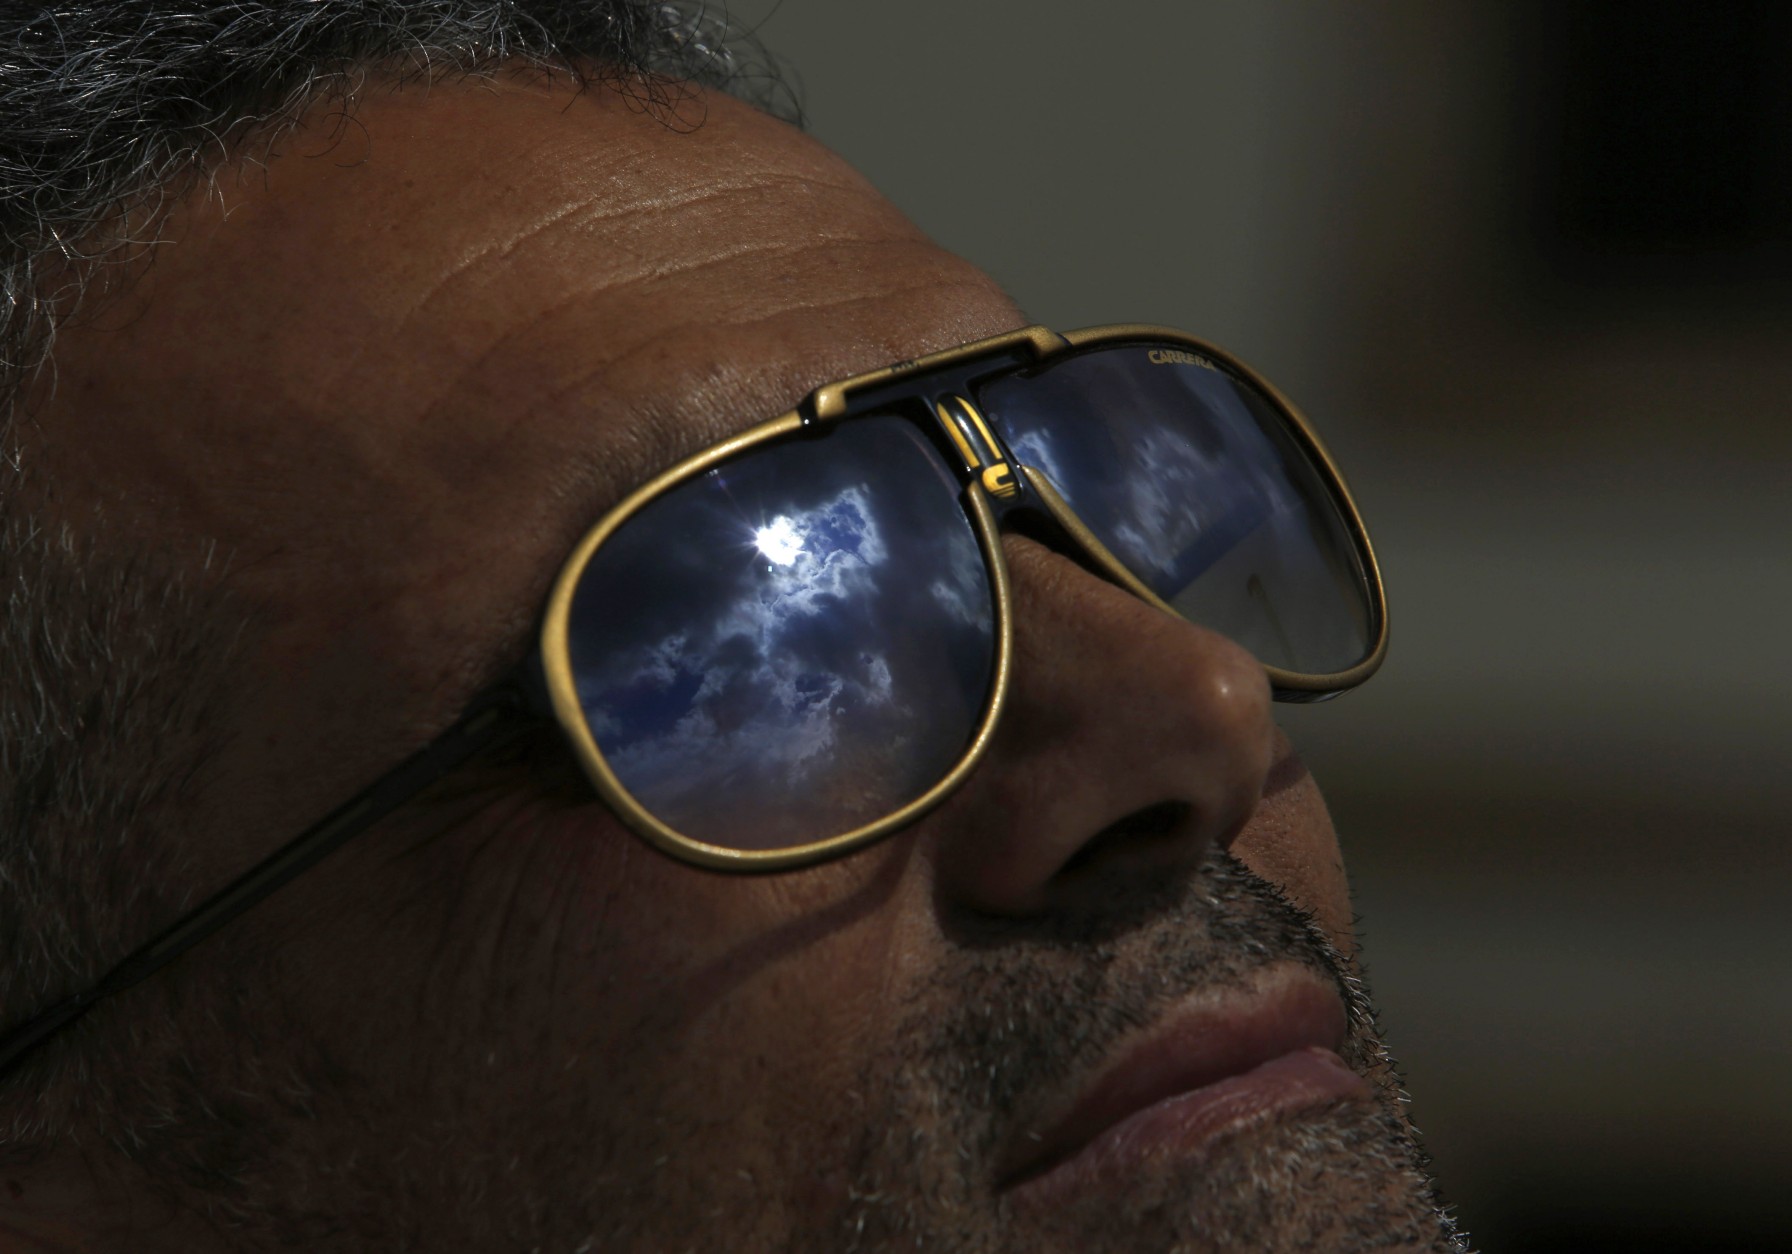 The solar  eclipse is reflected on the sunglasses of a man in  Nicosia, Cyprus, Friday, March 20, 2015. An eclipse is darkening parts of Europe on Friday in a rare solar event that won't be repeated for more than a decade. (AP Photo/Petros Karadjias)